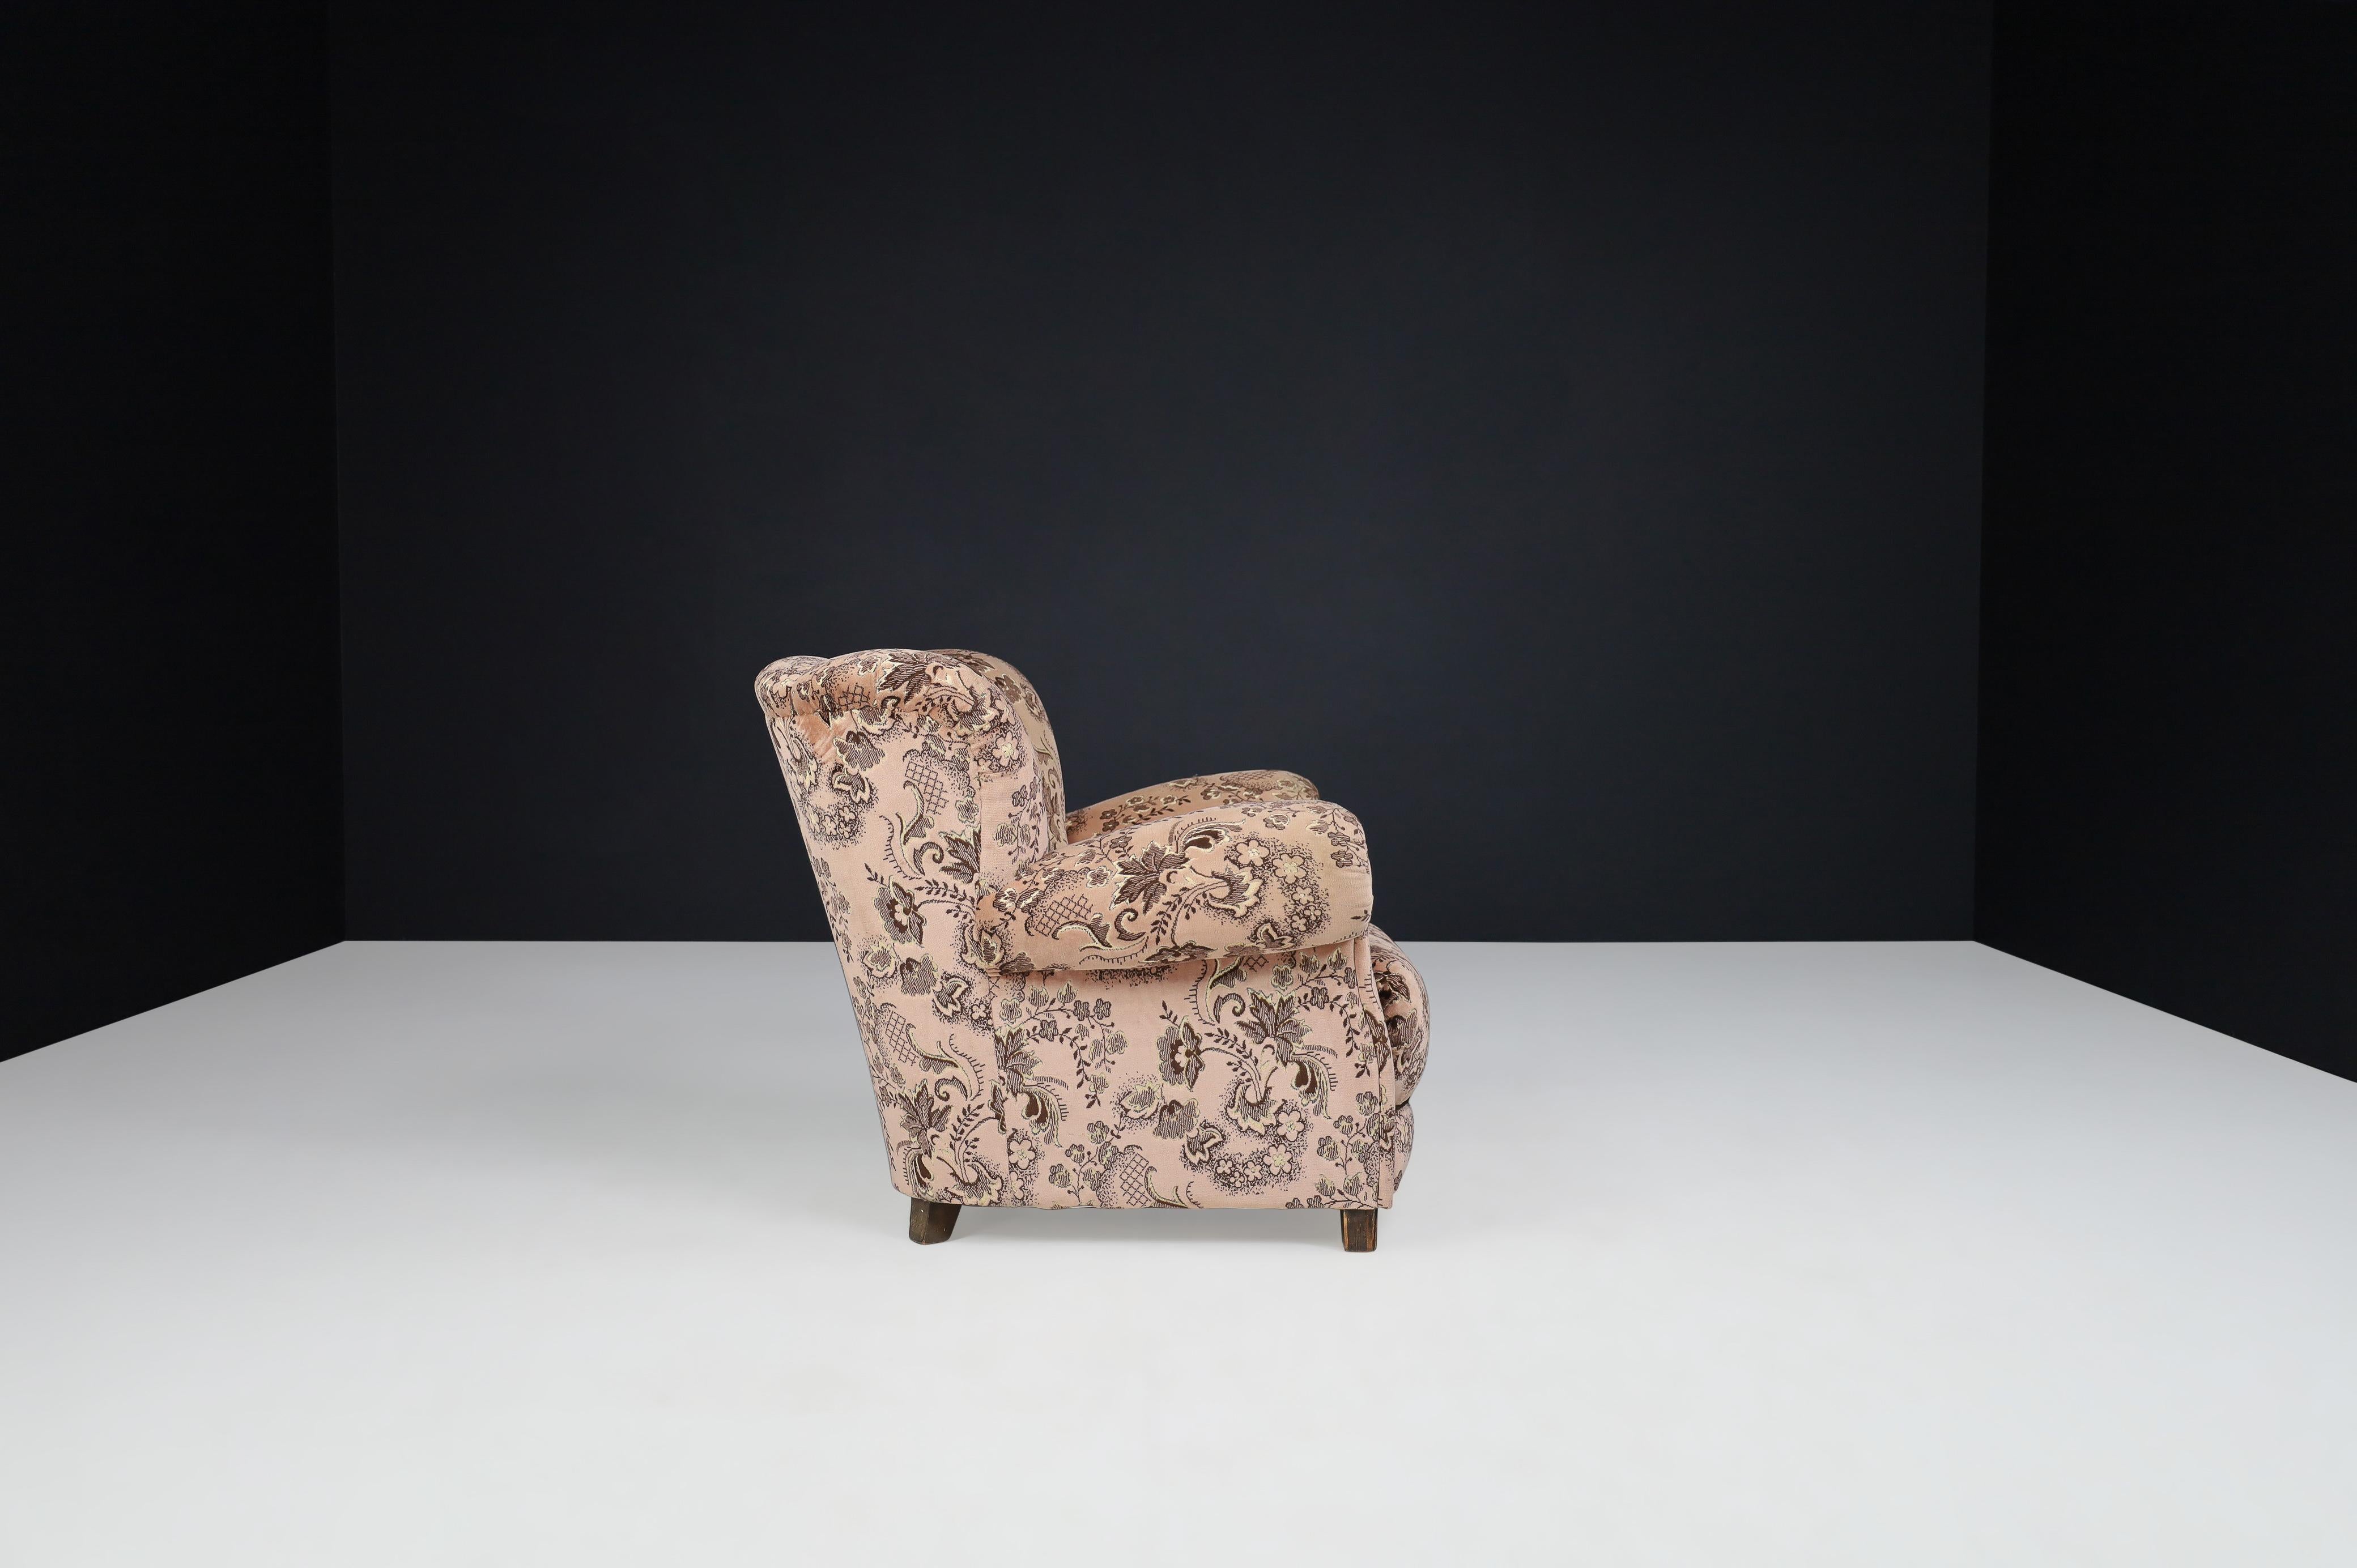 20th Century Art Deco Lounge Chair in Floral Fabric Prague, 1930s